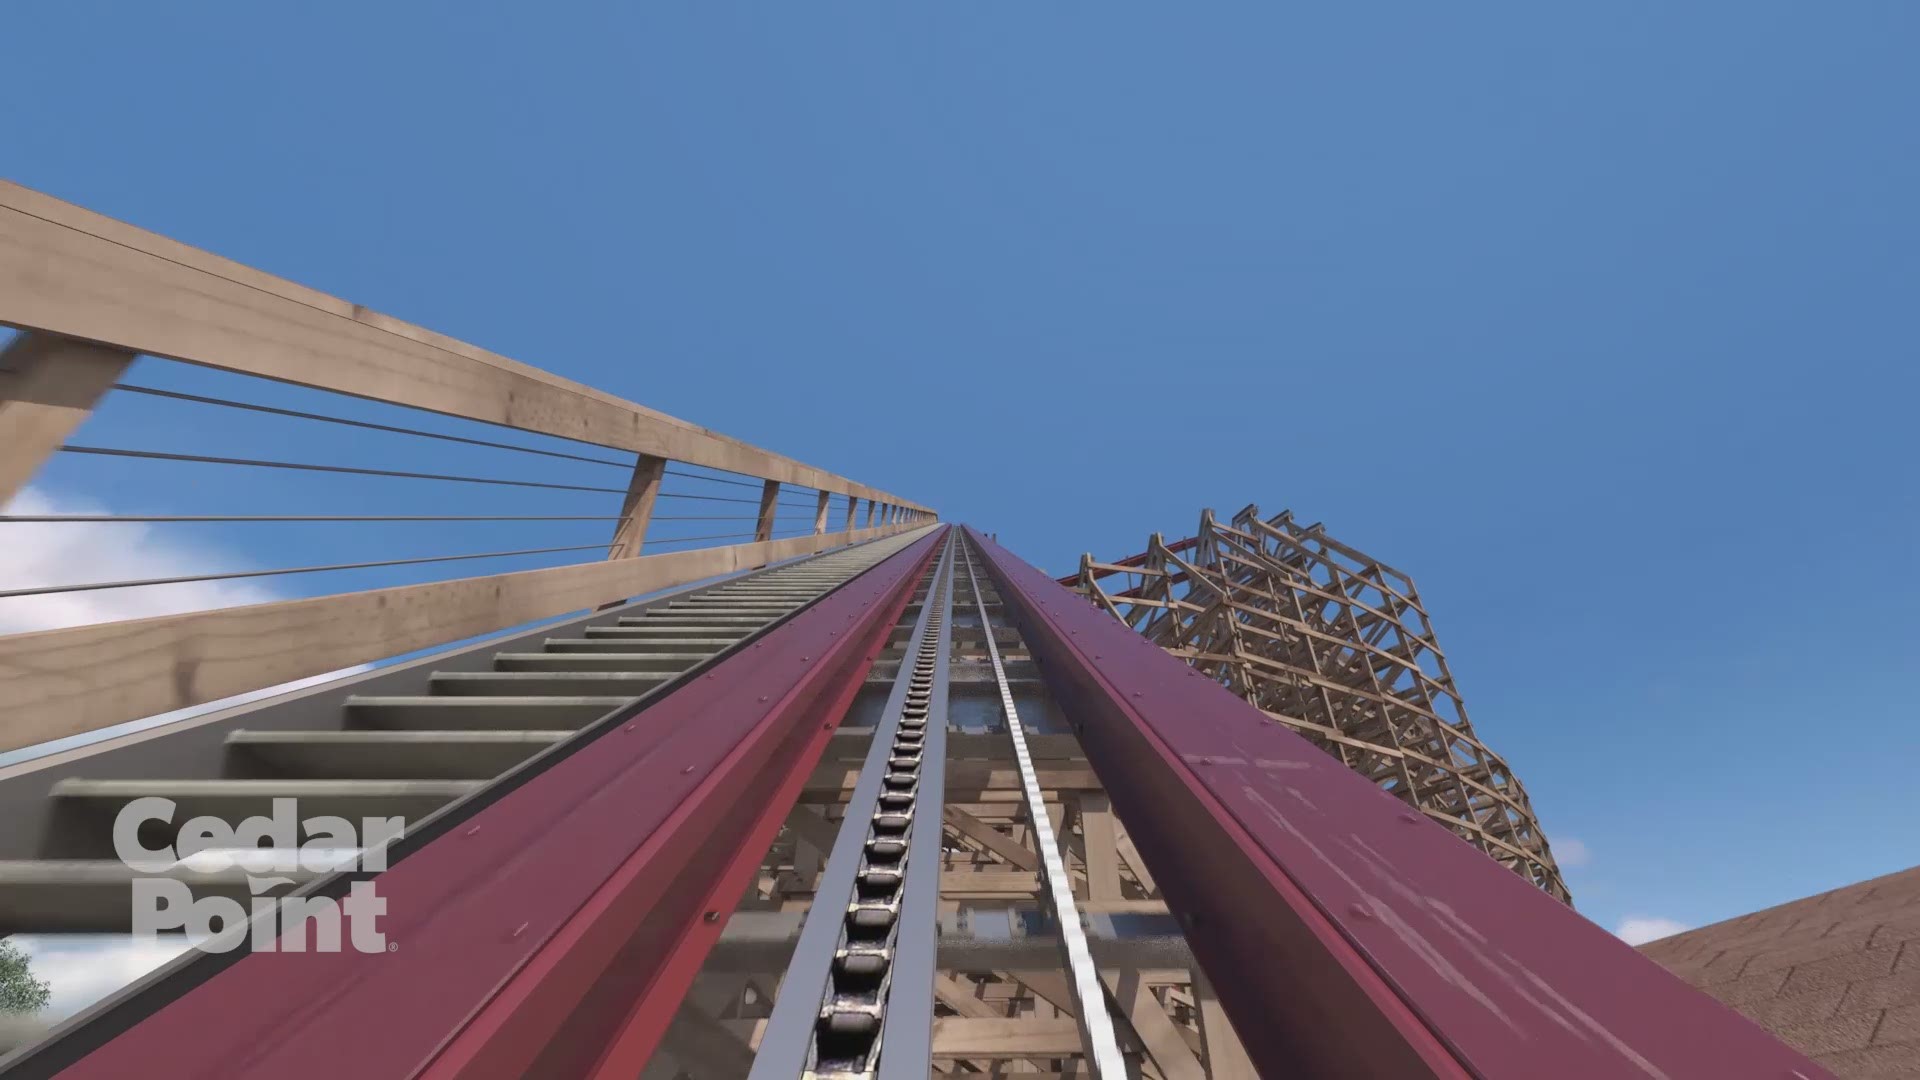 Here is what a front-seat ride on Cedar Point's Steel Vengeance roller coaster will be like when it opens in May 2018. Steel Vengeance, which is a wood-steel hybrid coaster built by Rocky Mountain Construction is taking over the former Mean Streak. The co